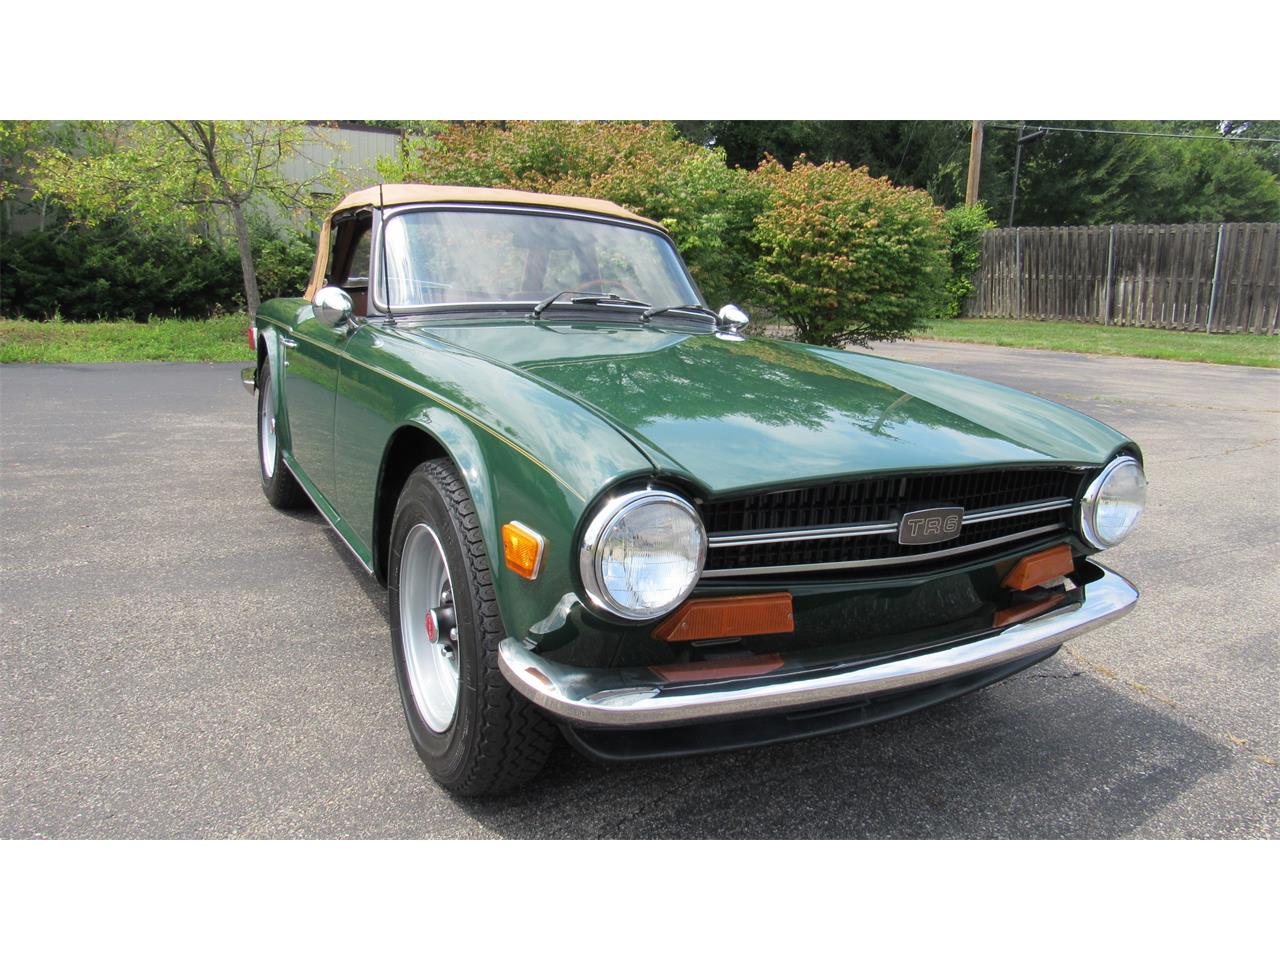 1974 Triumph TR6 for sale in Milford, OH – photo 90